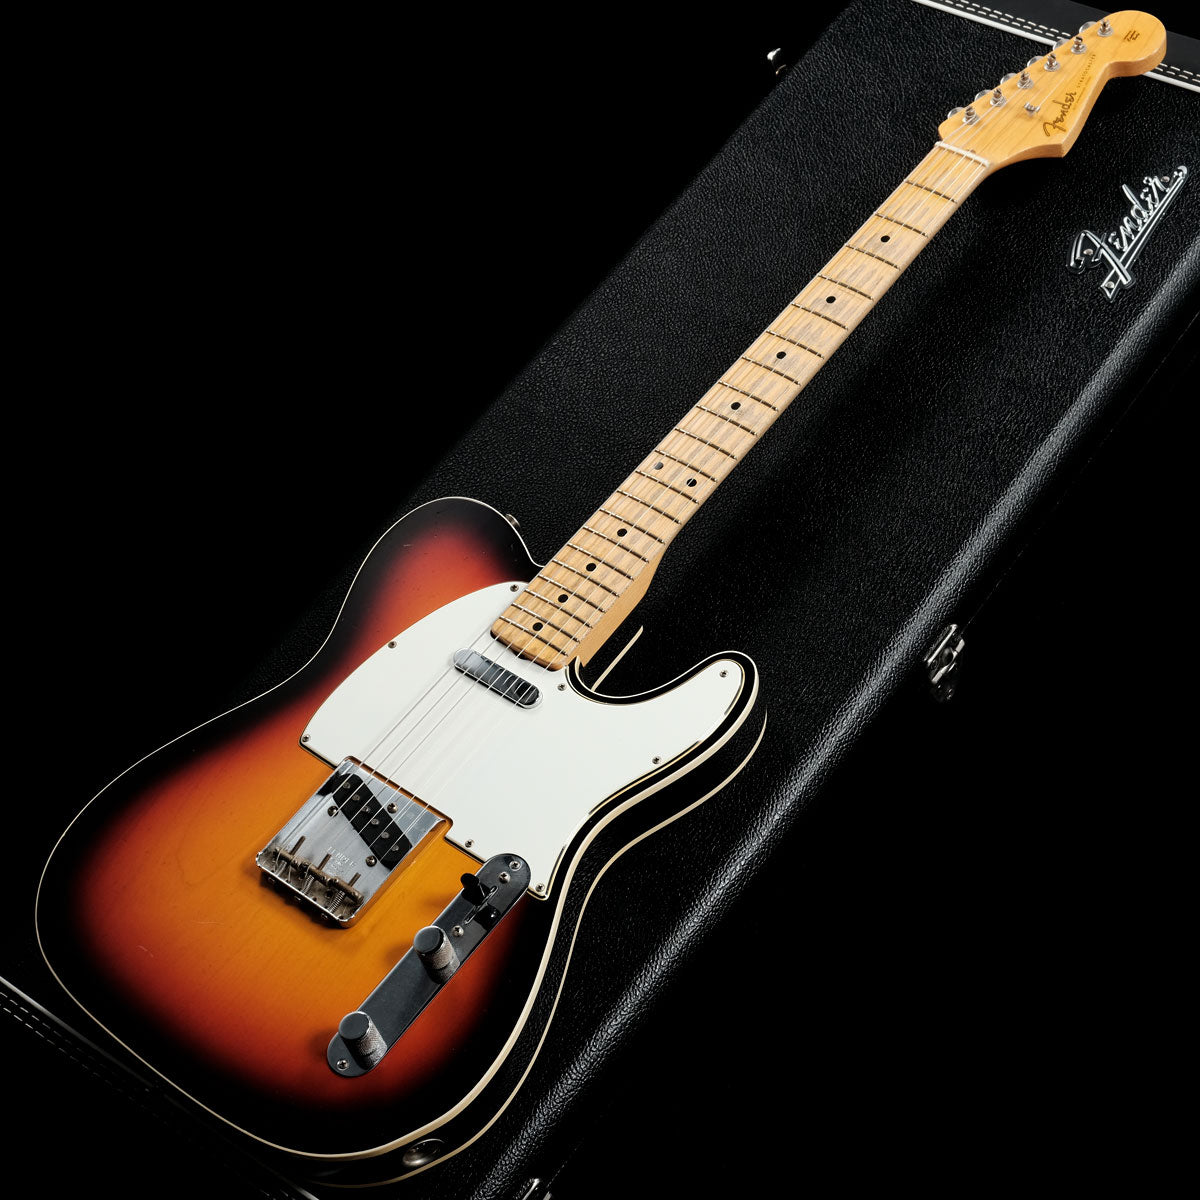 [SN 2534] USED FENDER CUSTOM SHOP / Limited Edition Eric Clapton Blind Faith Telecaster by Todd Krause Faded 3-Color Sunburst [05]